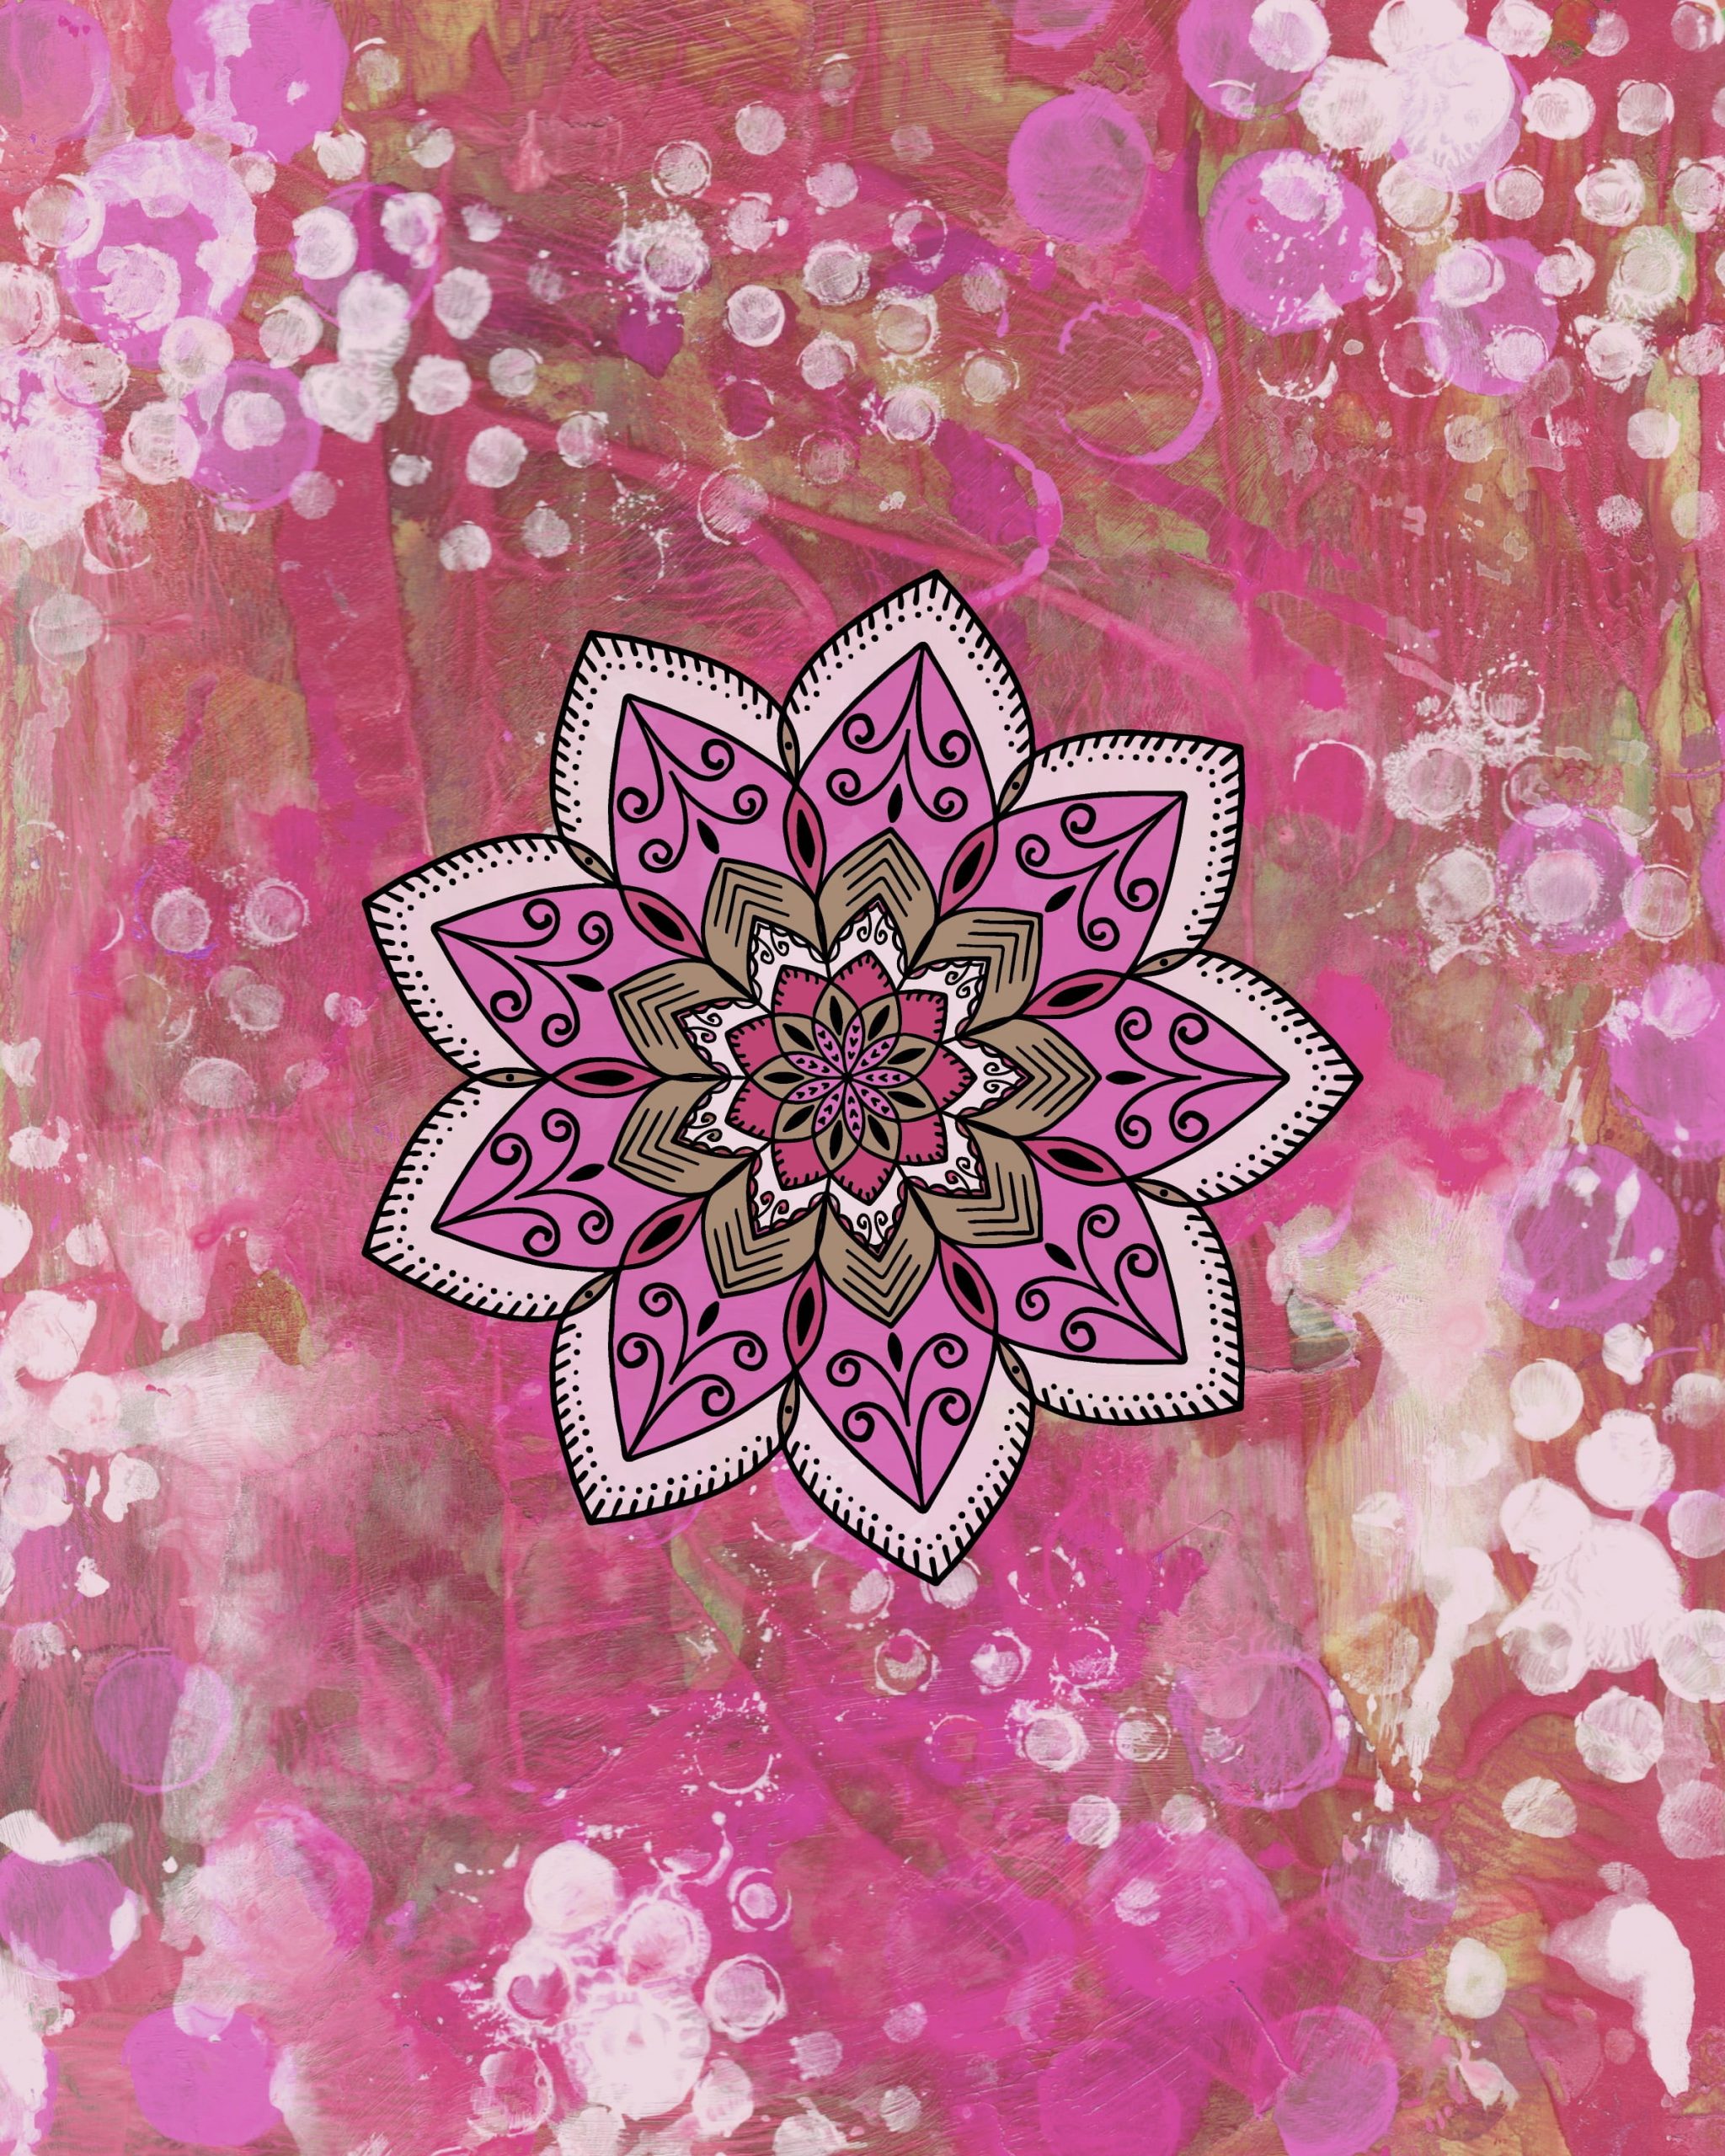 Wallpaper Mandala, Patterns, Stains, Texture, Pink Color